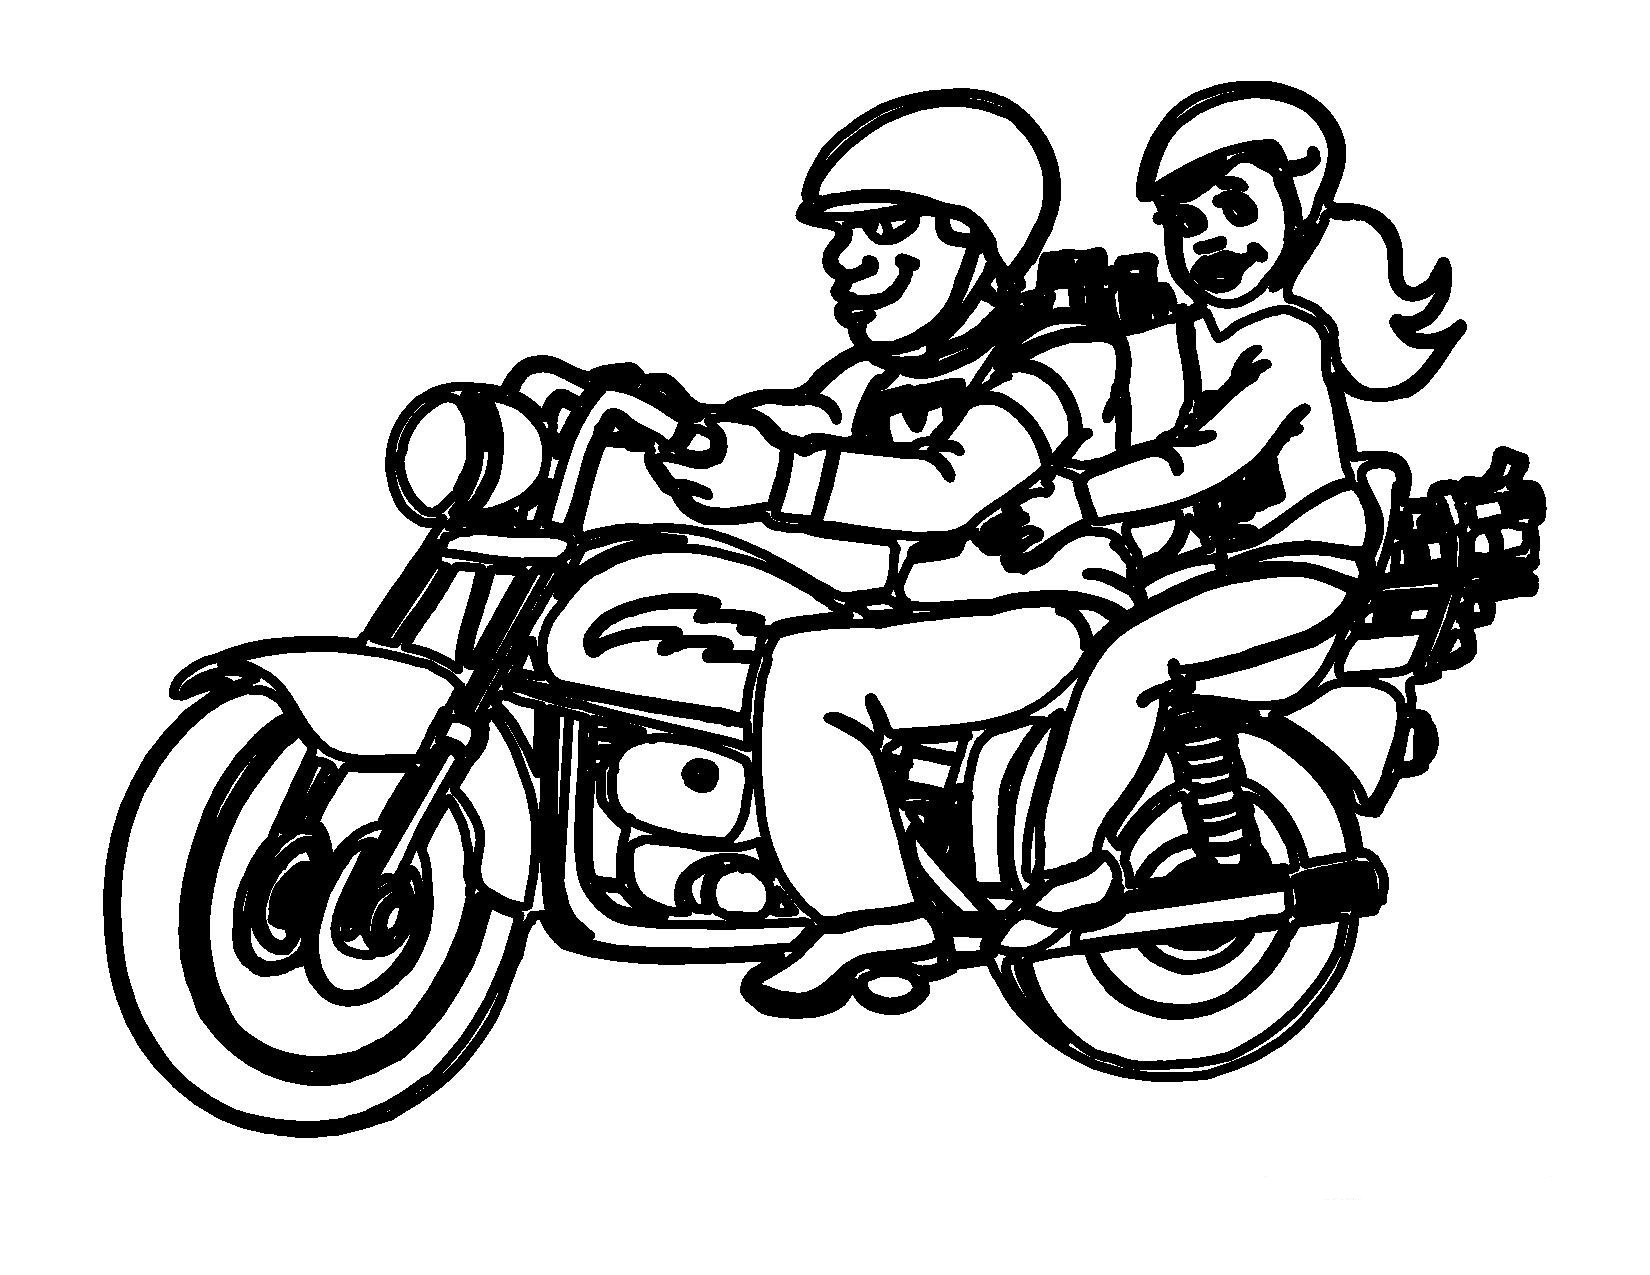 Motorbike coloring pages to download and print for free